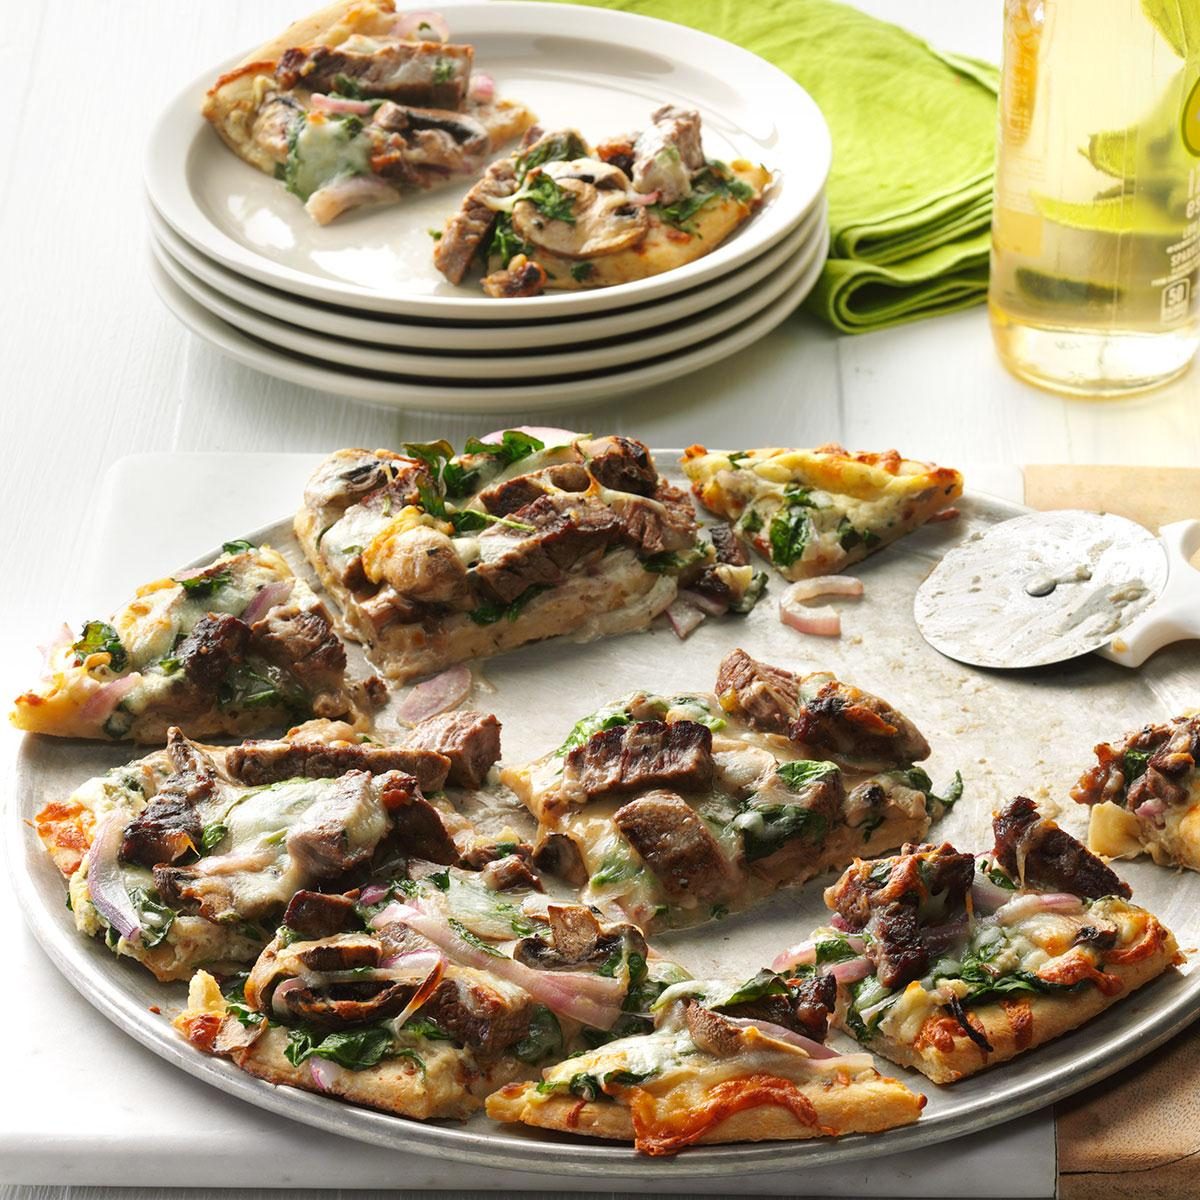 <h3>Start with 1 pound of precooked top sirloin steak</h3> <p>This pizza with leftover steak and veggies is for folks who like their pie with everything on top. And since it's ready in 30 minutes, it's perfect for busy weeknights. </p> <div class="listicle-page__buttons"> <div class="listicle-page__cta-button"><a href='https://www.tasteofhome.com/recipes/garlic-herb-steak-pizza/'>Go to Recipe</a></div> </div>